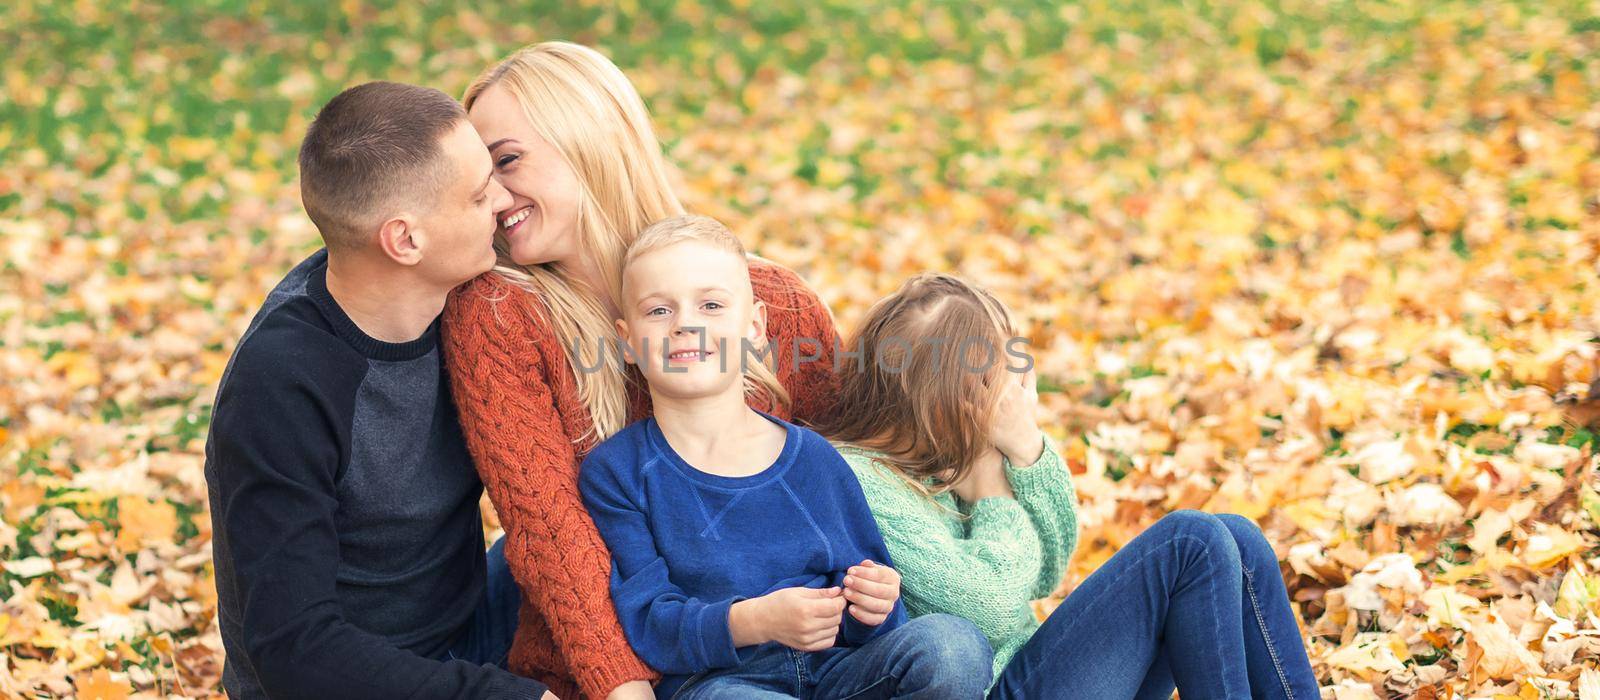 Portrait of young family sitting in autumn leaves by okskukuruza